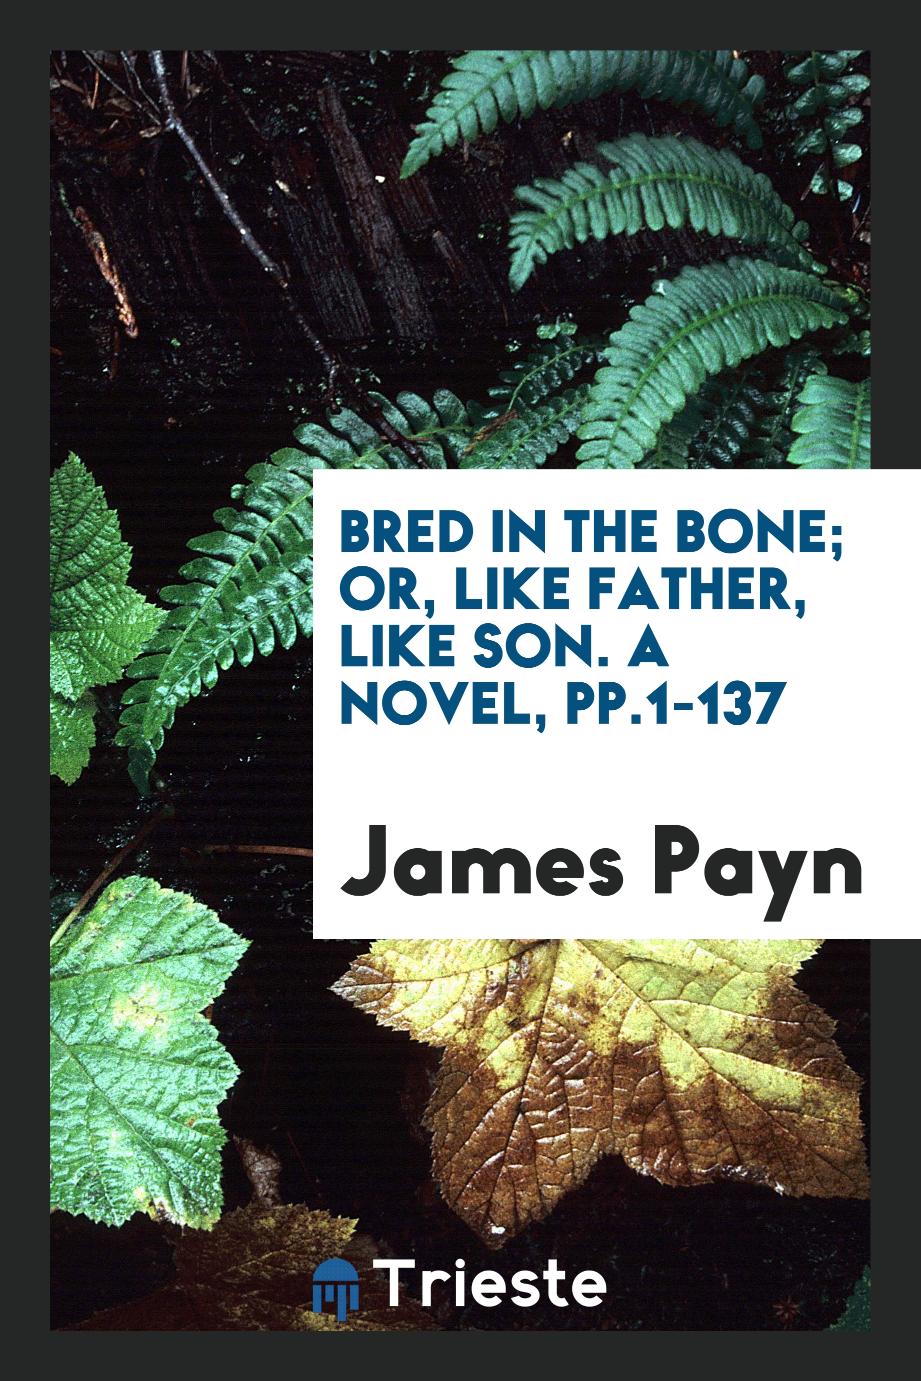 Bred in the Bone; Or, Like Father, Like Son. A Novel, pp.1-137